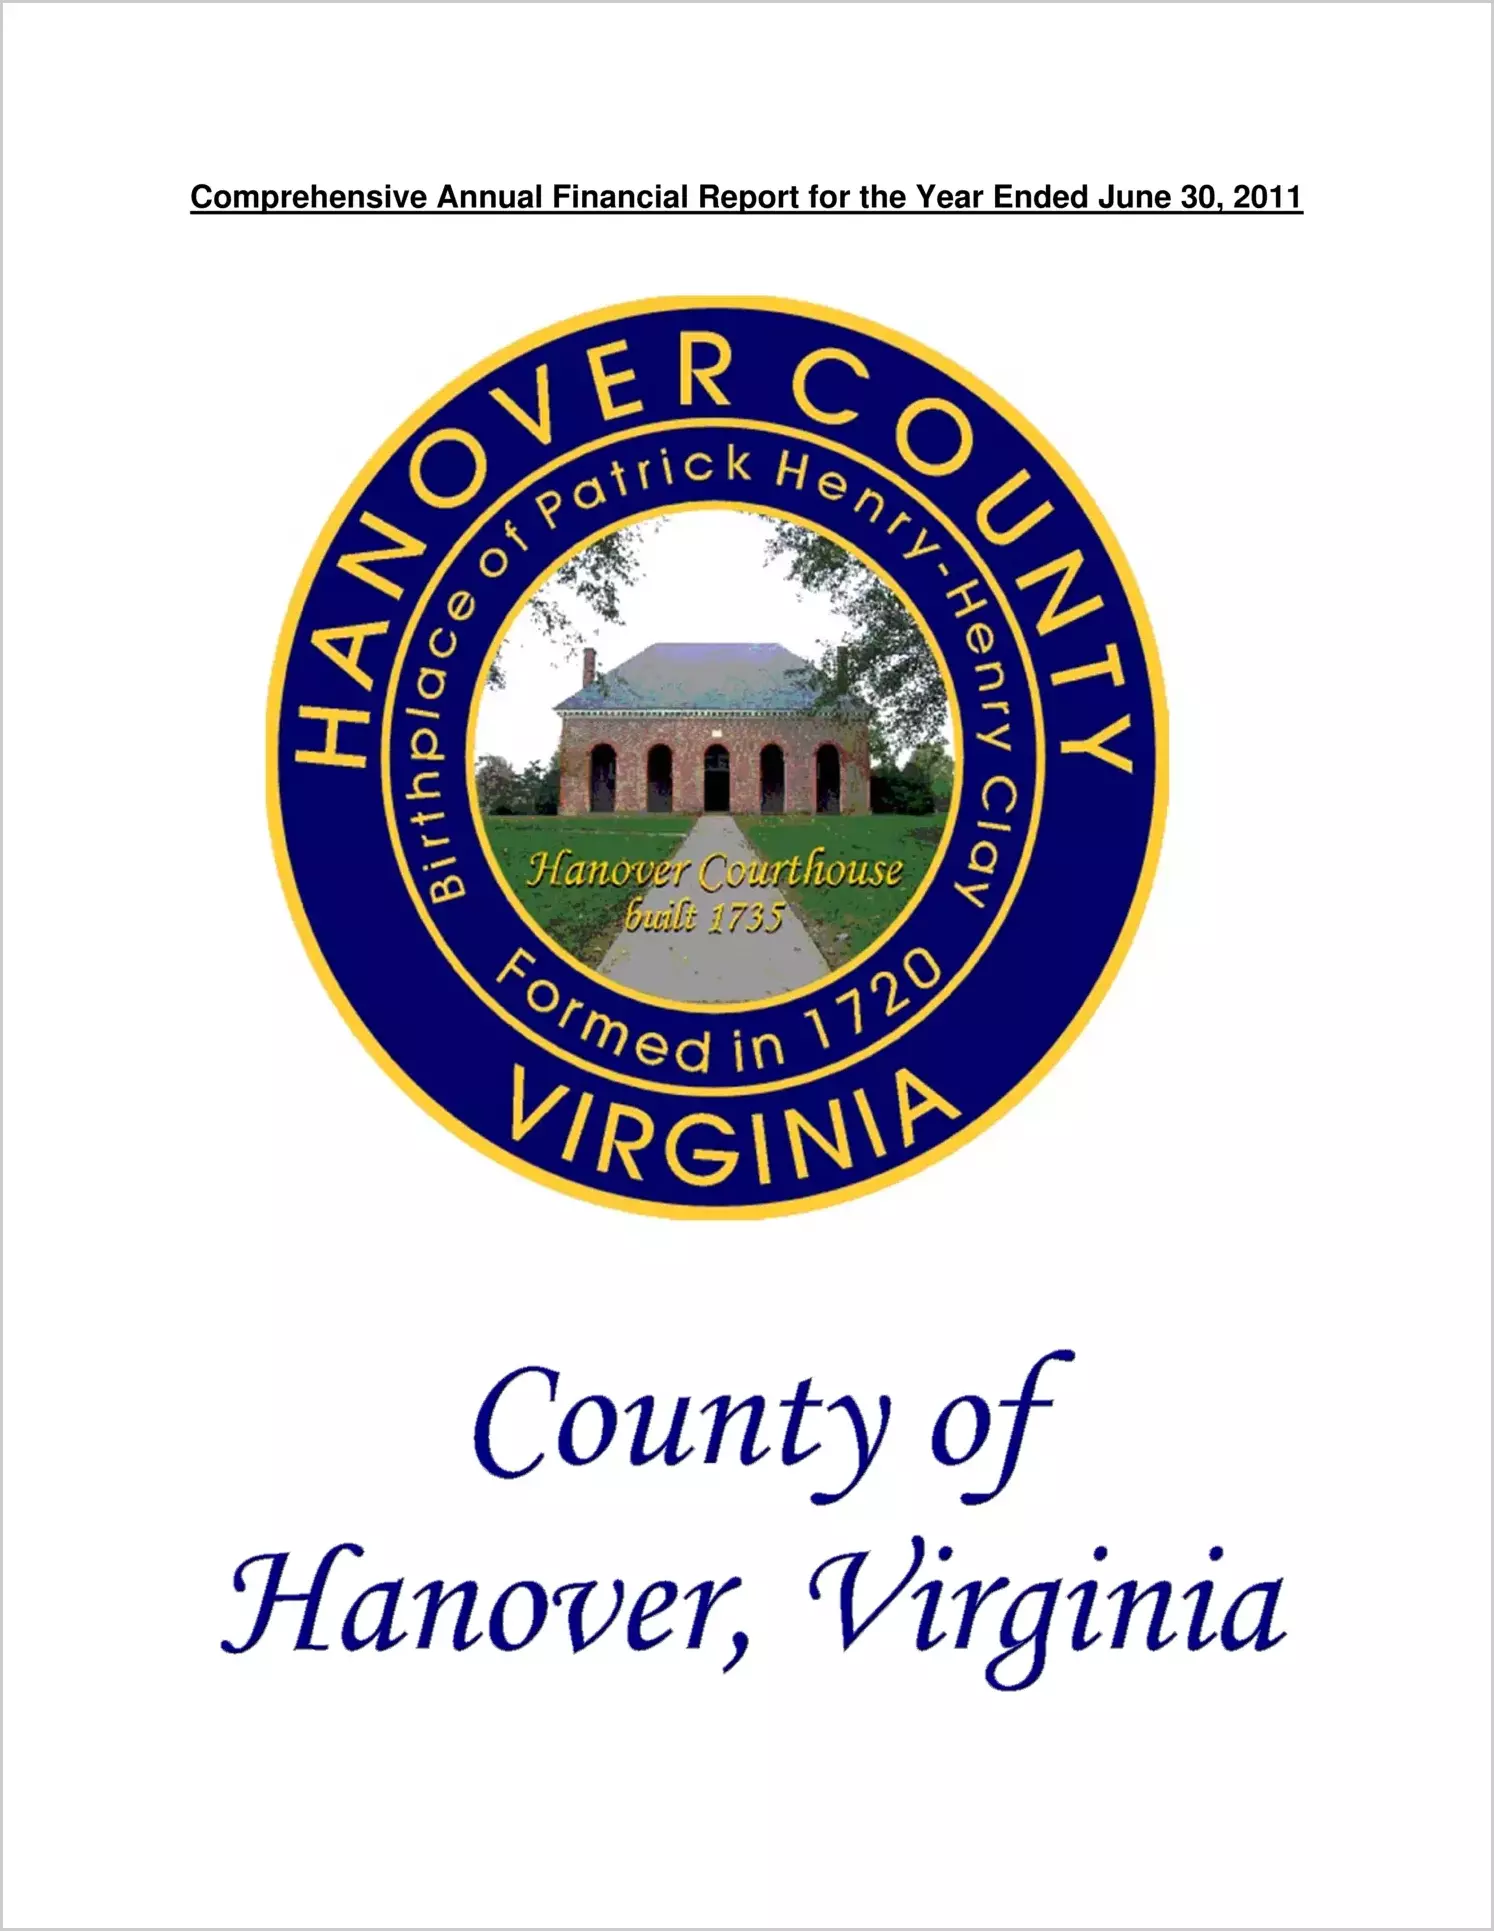 2010 Annual Financial Report for County of Hanover